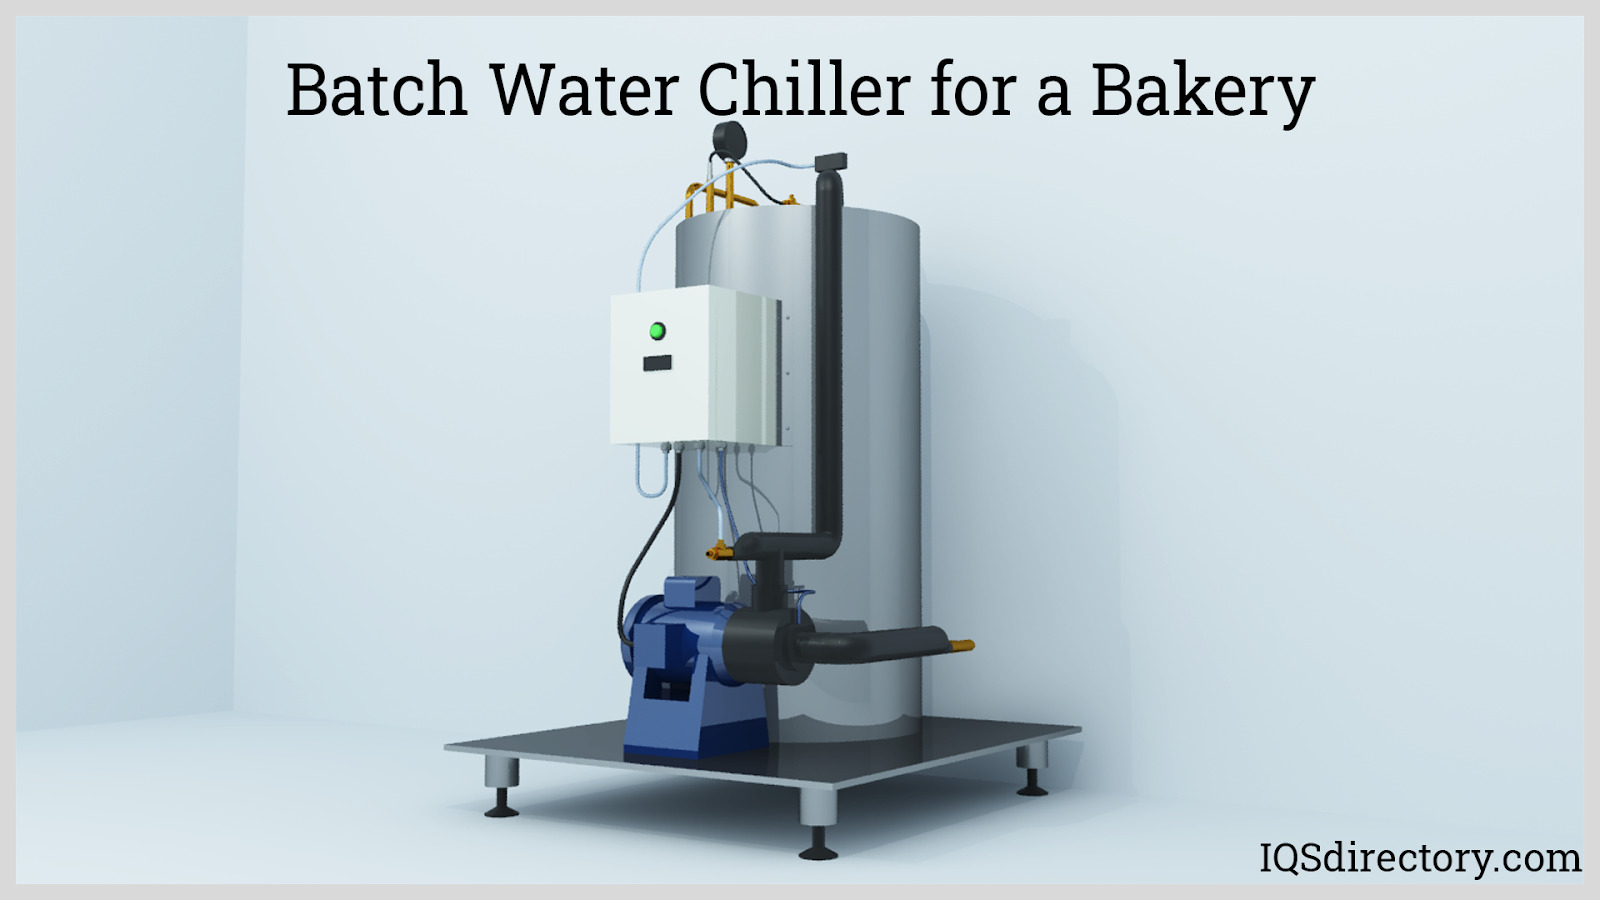 Batch Water Chiller for a Bakery